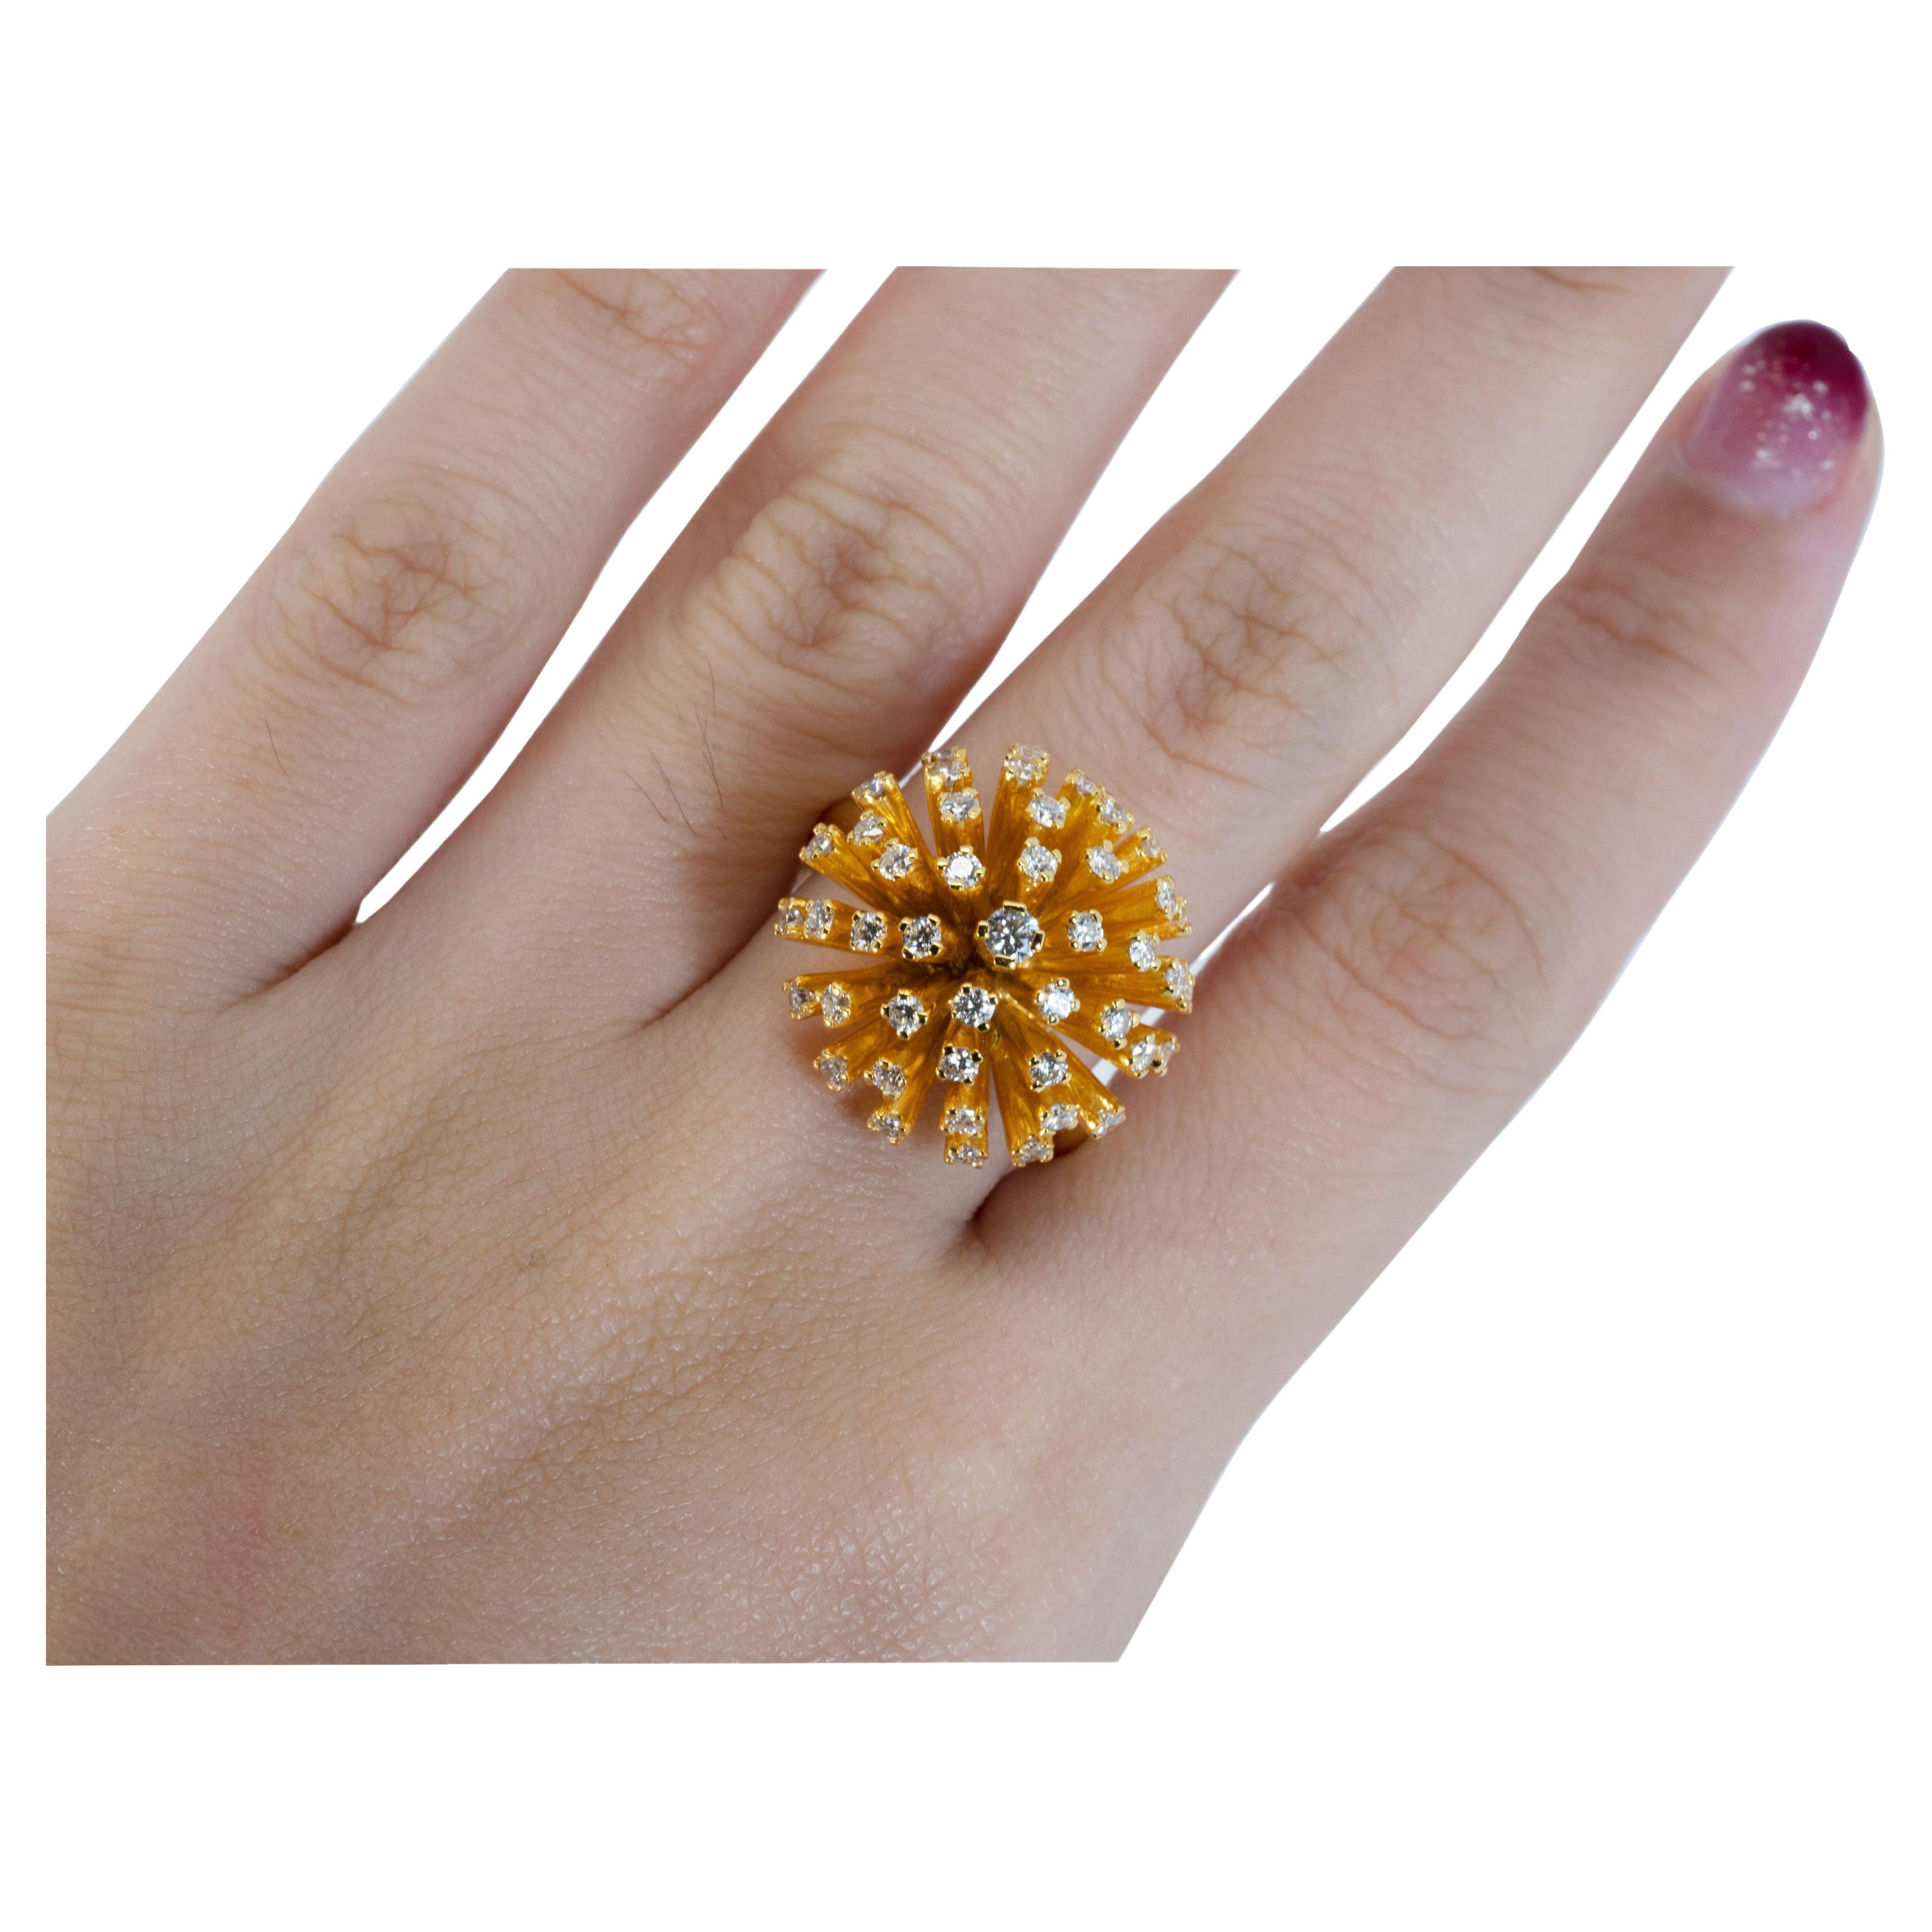 Beautiful Exploding Flower Styled Ring made from 18K Yellow Gold with a Total of 1.41 Carat Round Brilliant Cut Diamonds. This ring comes with an IGI certificate.

-47 diamond main stones of 0.03 ct. each, total: 1.41 ct. 
cut: round